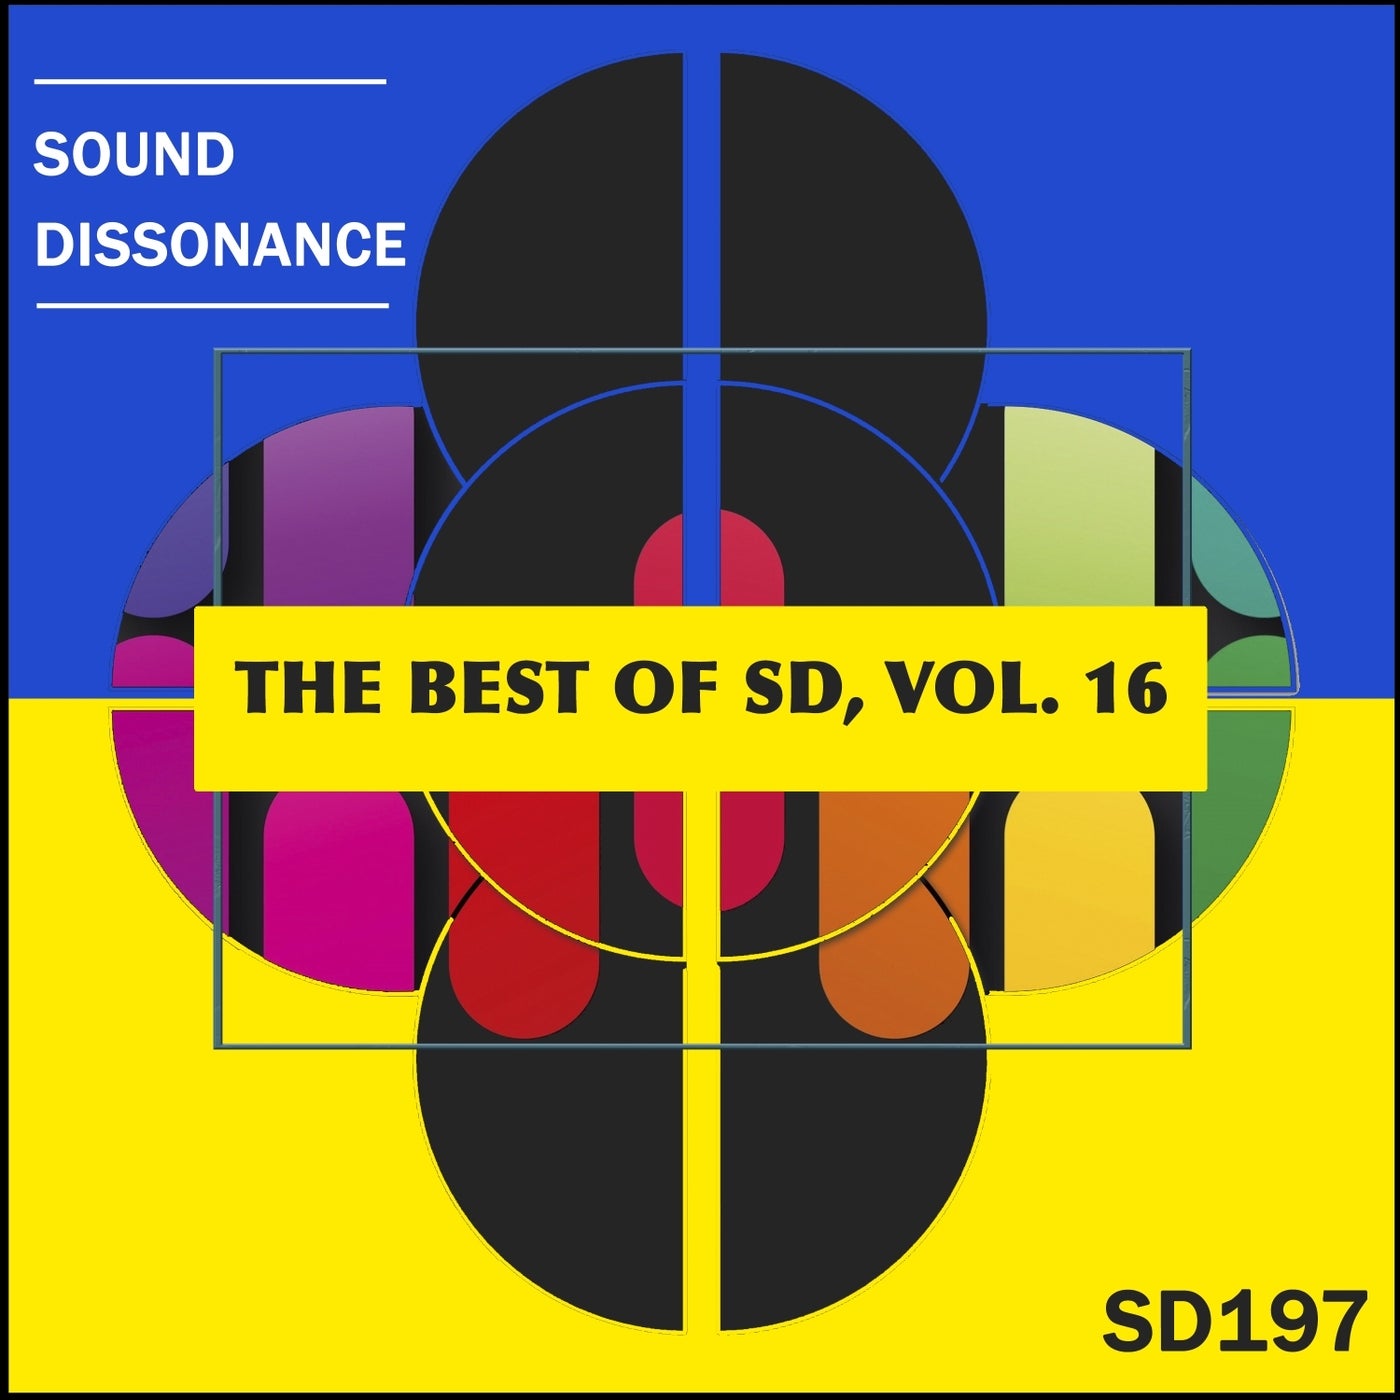 Roby M Rage, Puncher – The Best of Sd, Vol. 16 [SD197]